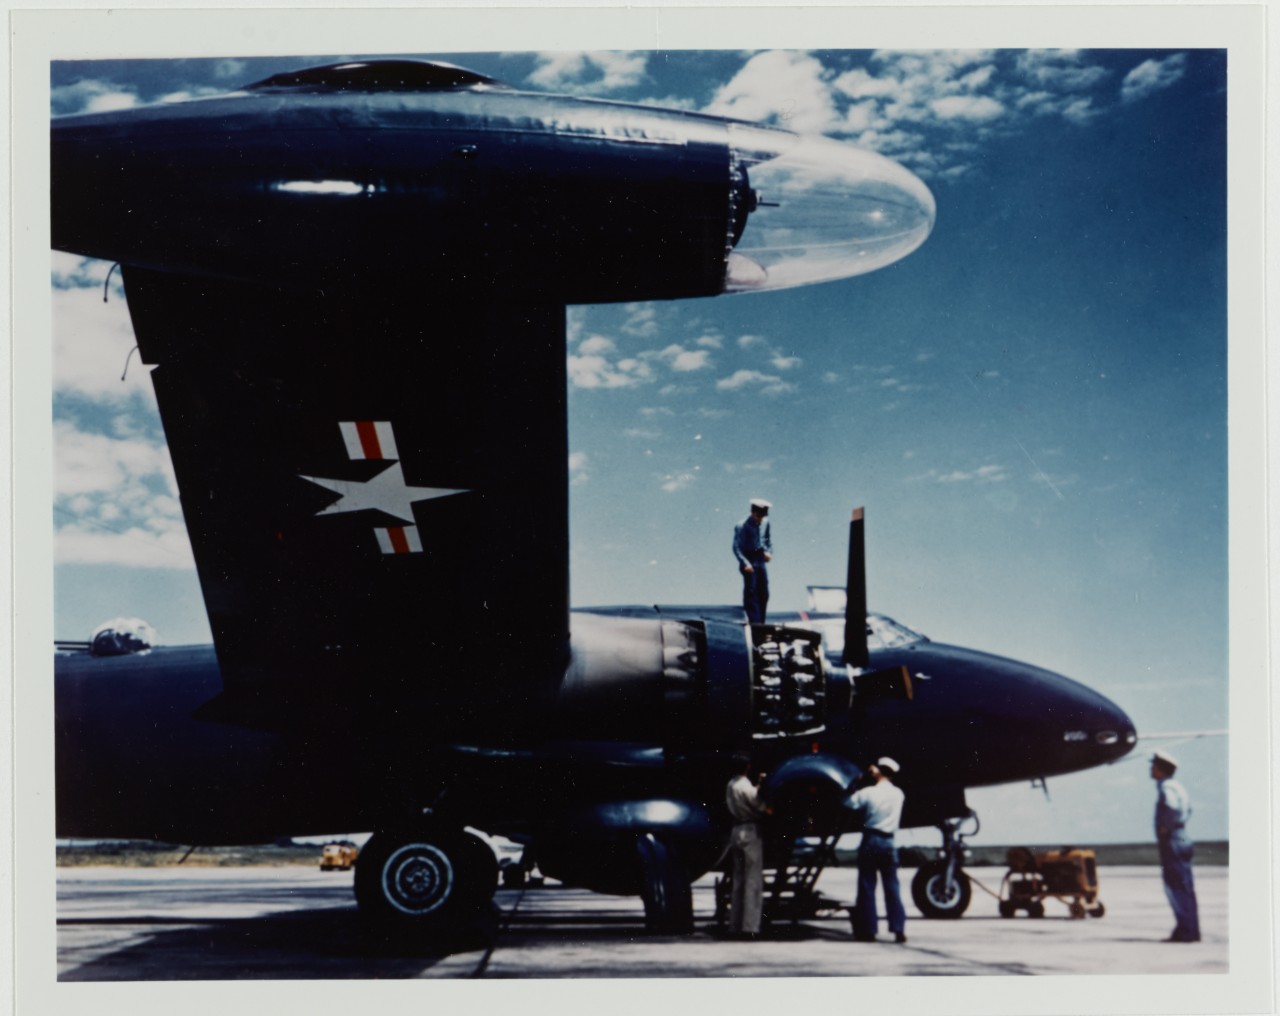 Lockheed P2V Neptune being serviced at Naval Air Test Center, Patuxent River, Maryland, circa 1950s